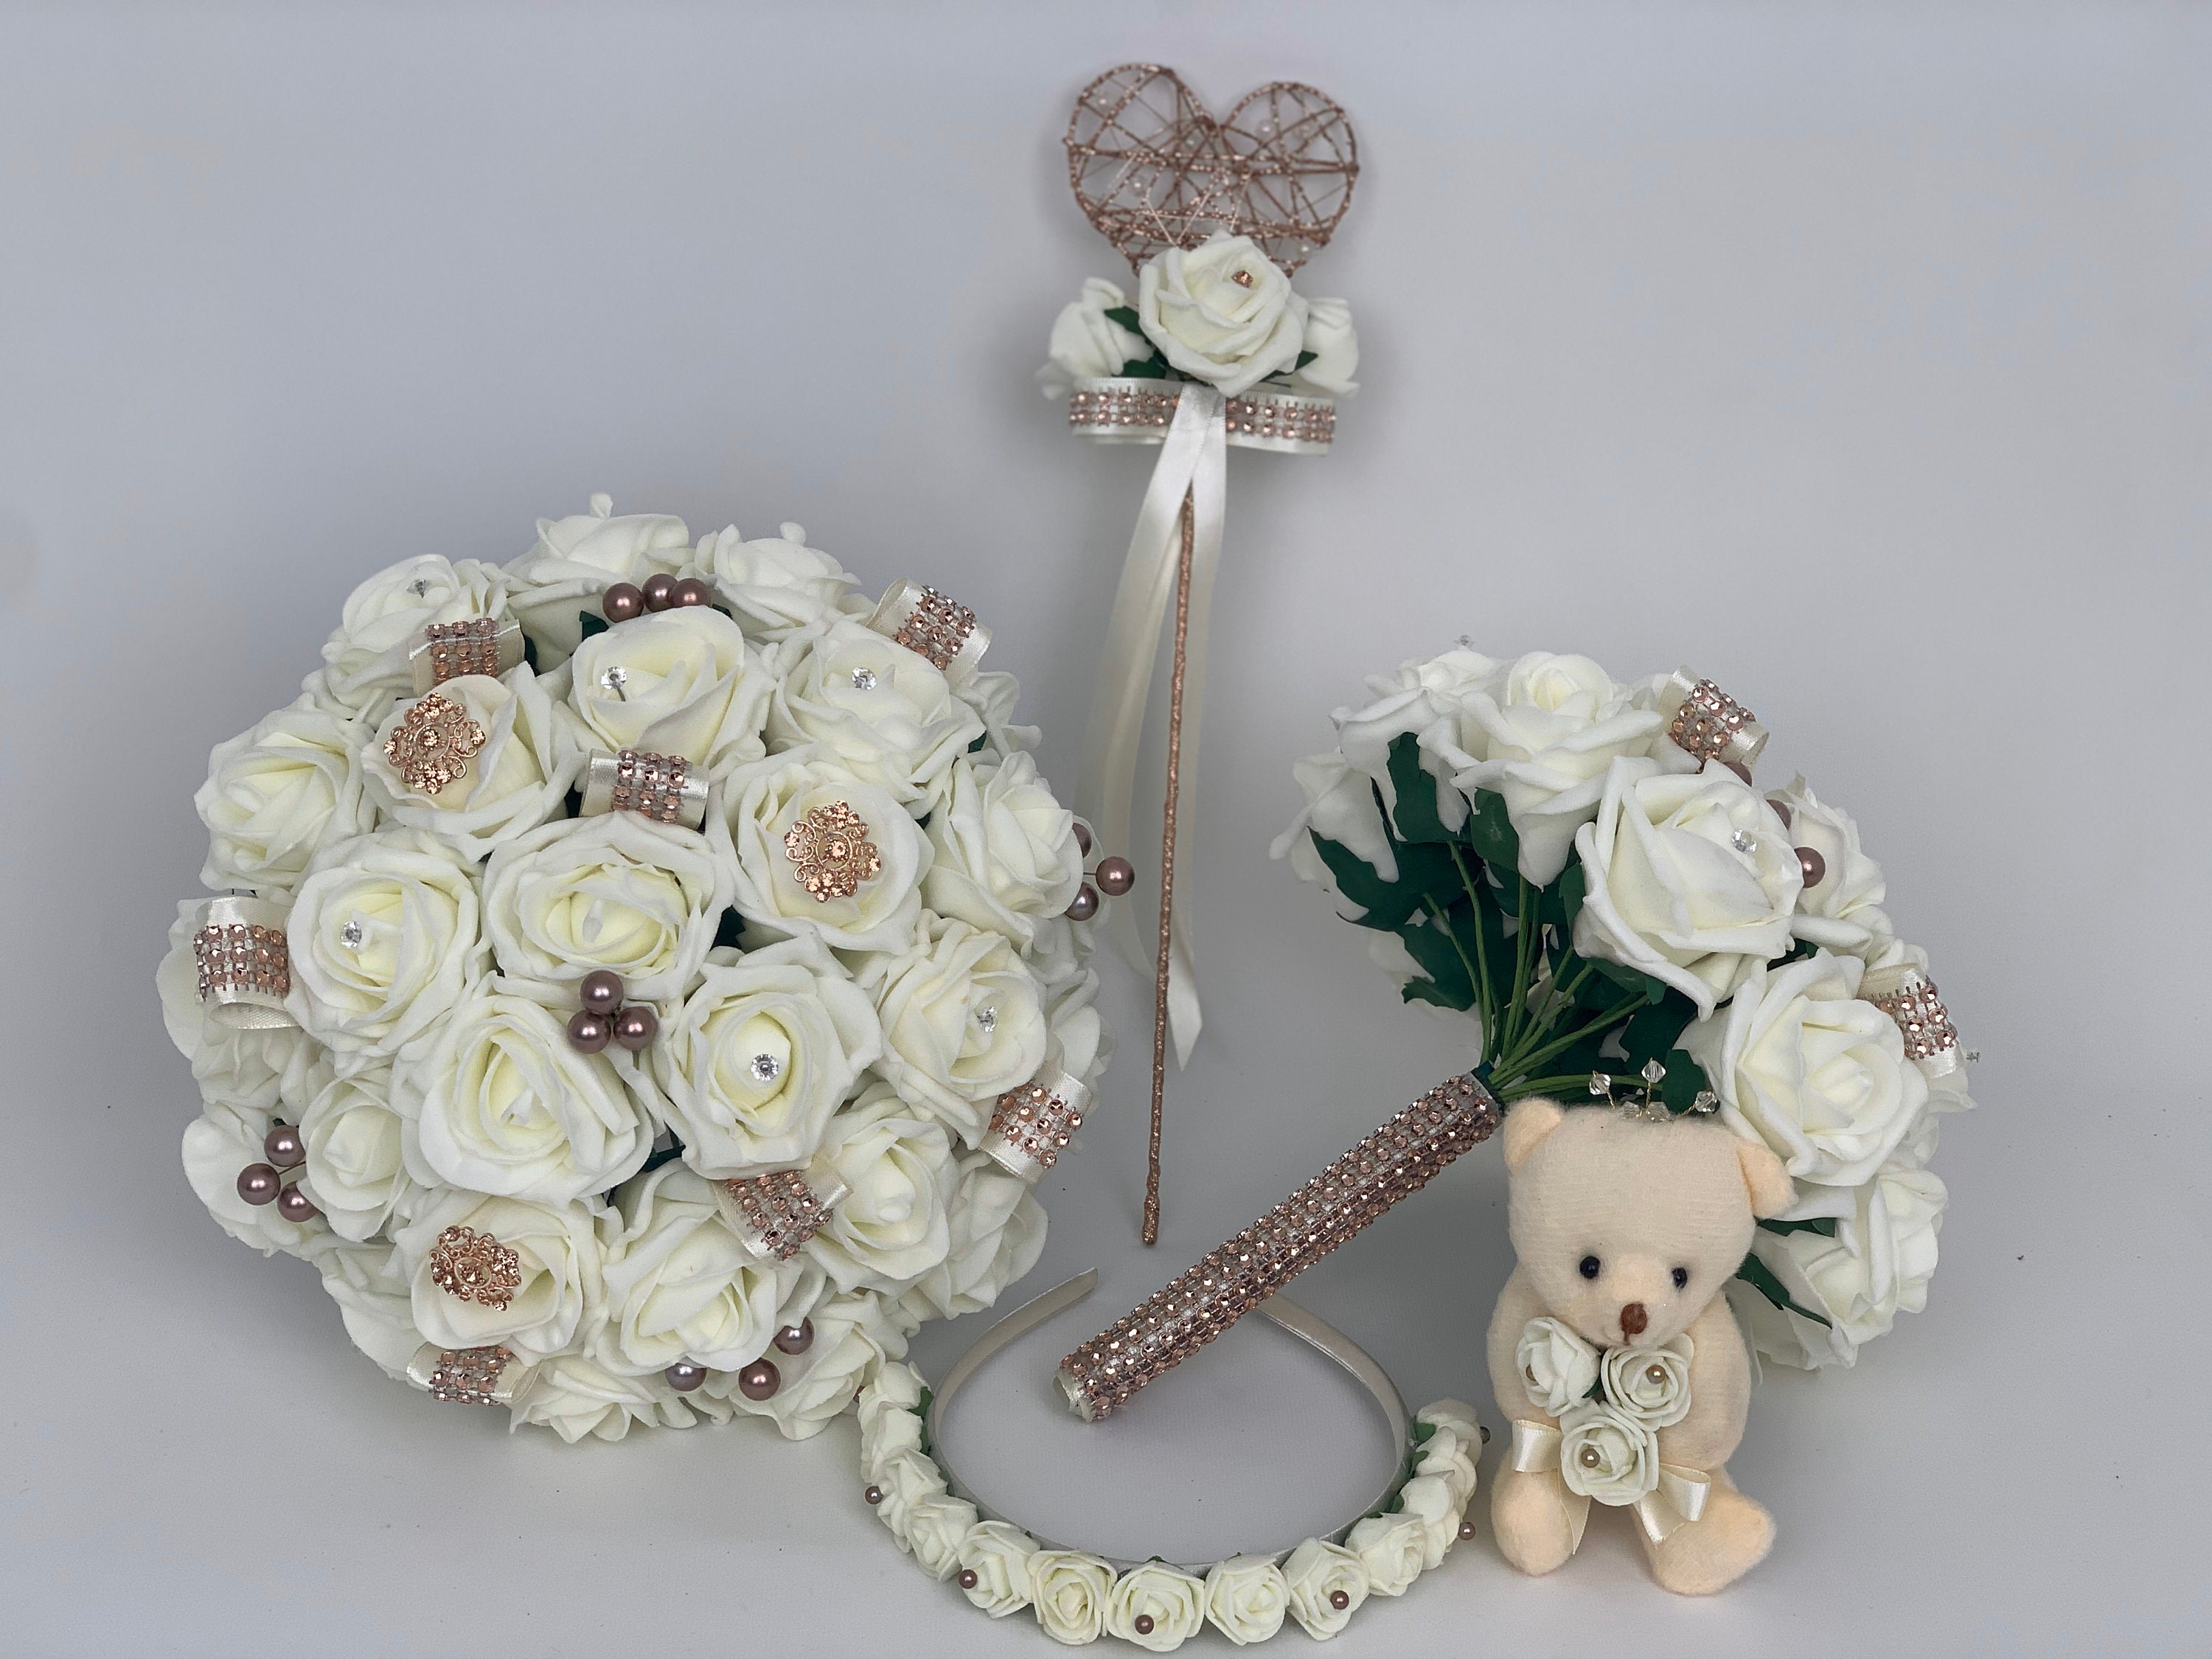 wedding bouquets rose gold ivory brides flowers posy bridesmaid flower girl  wand